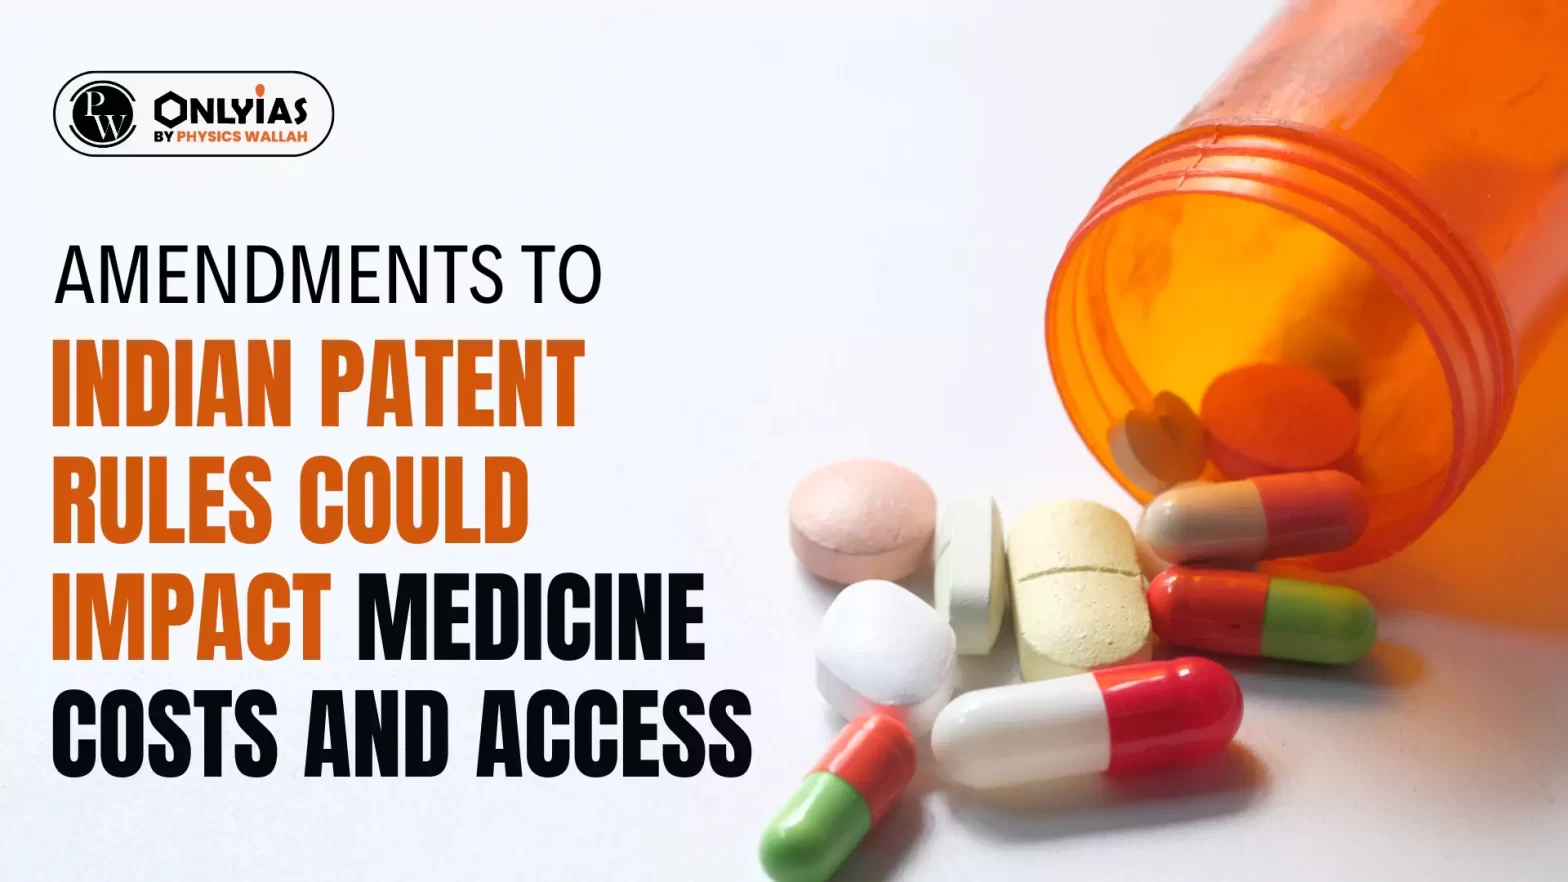 Amendments to Indian Patent Rules Could Impact Medicine Costs and Access